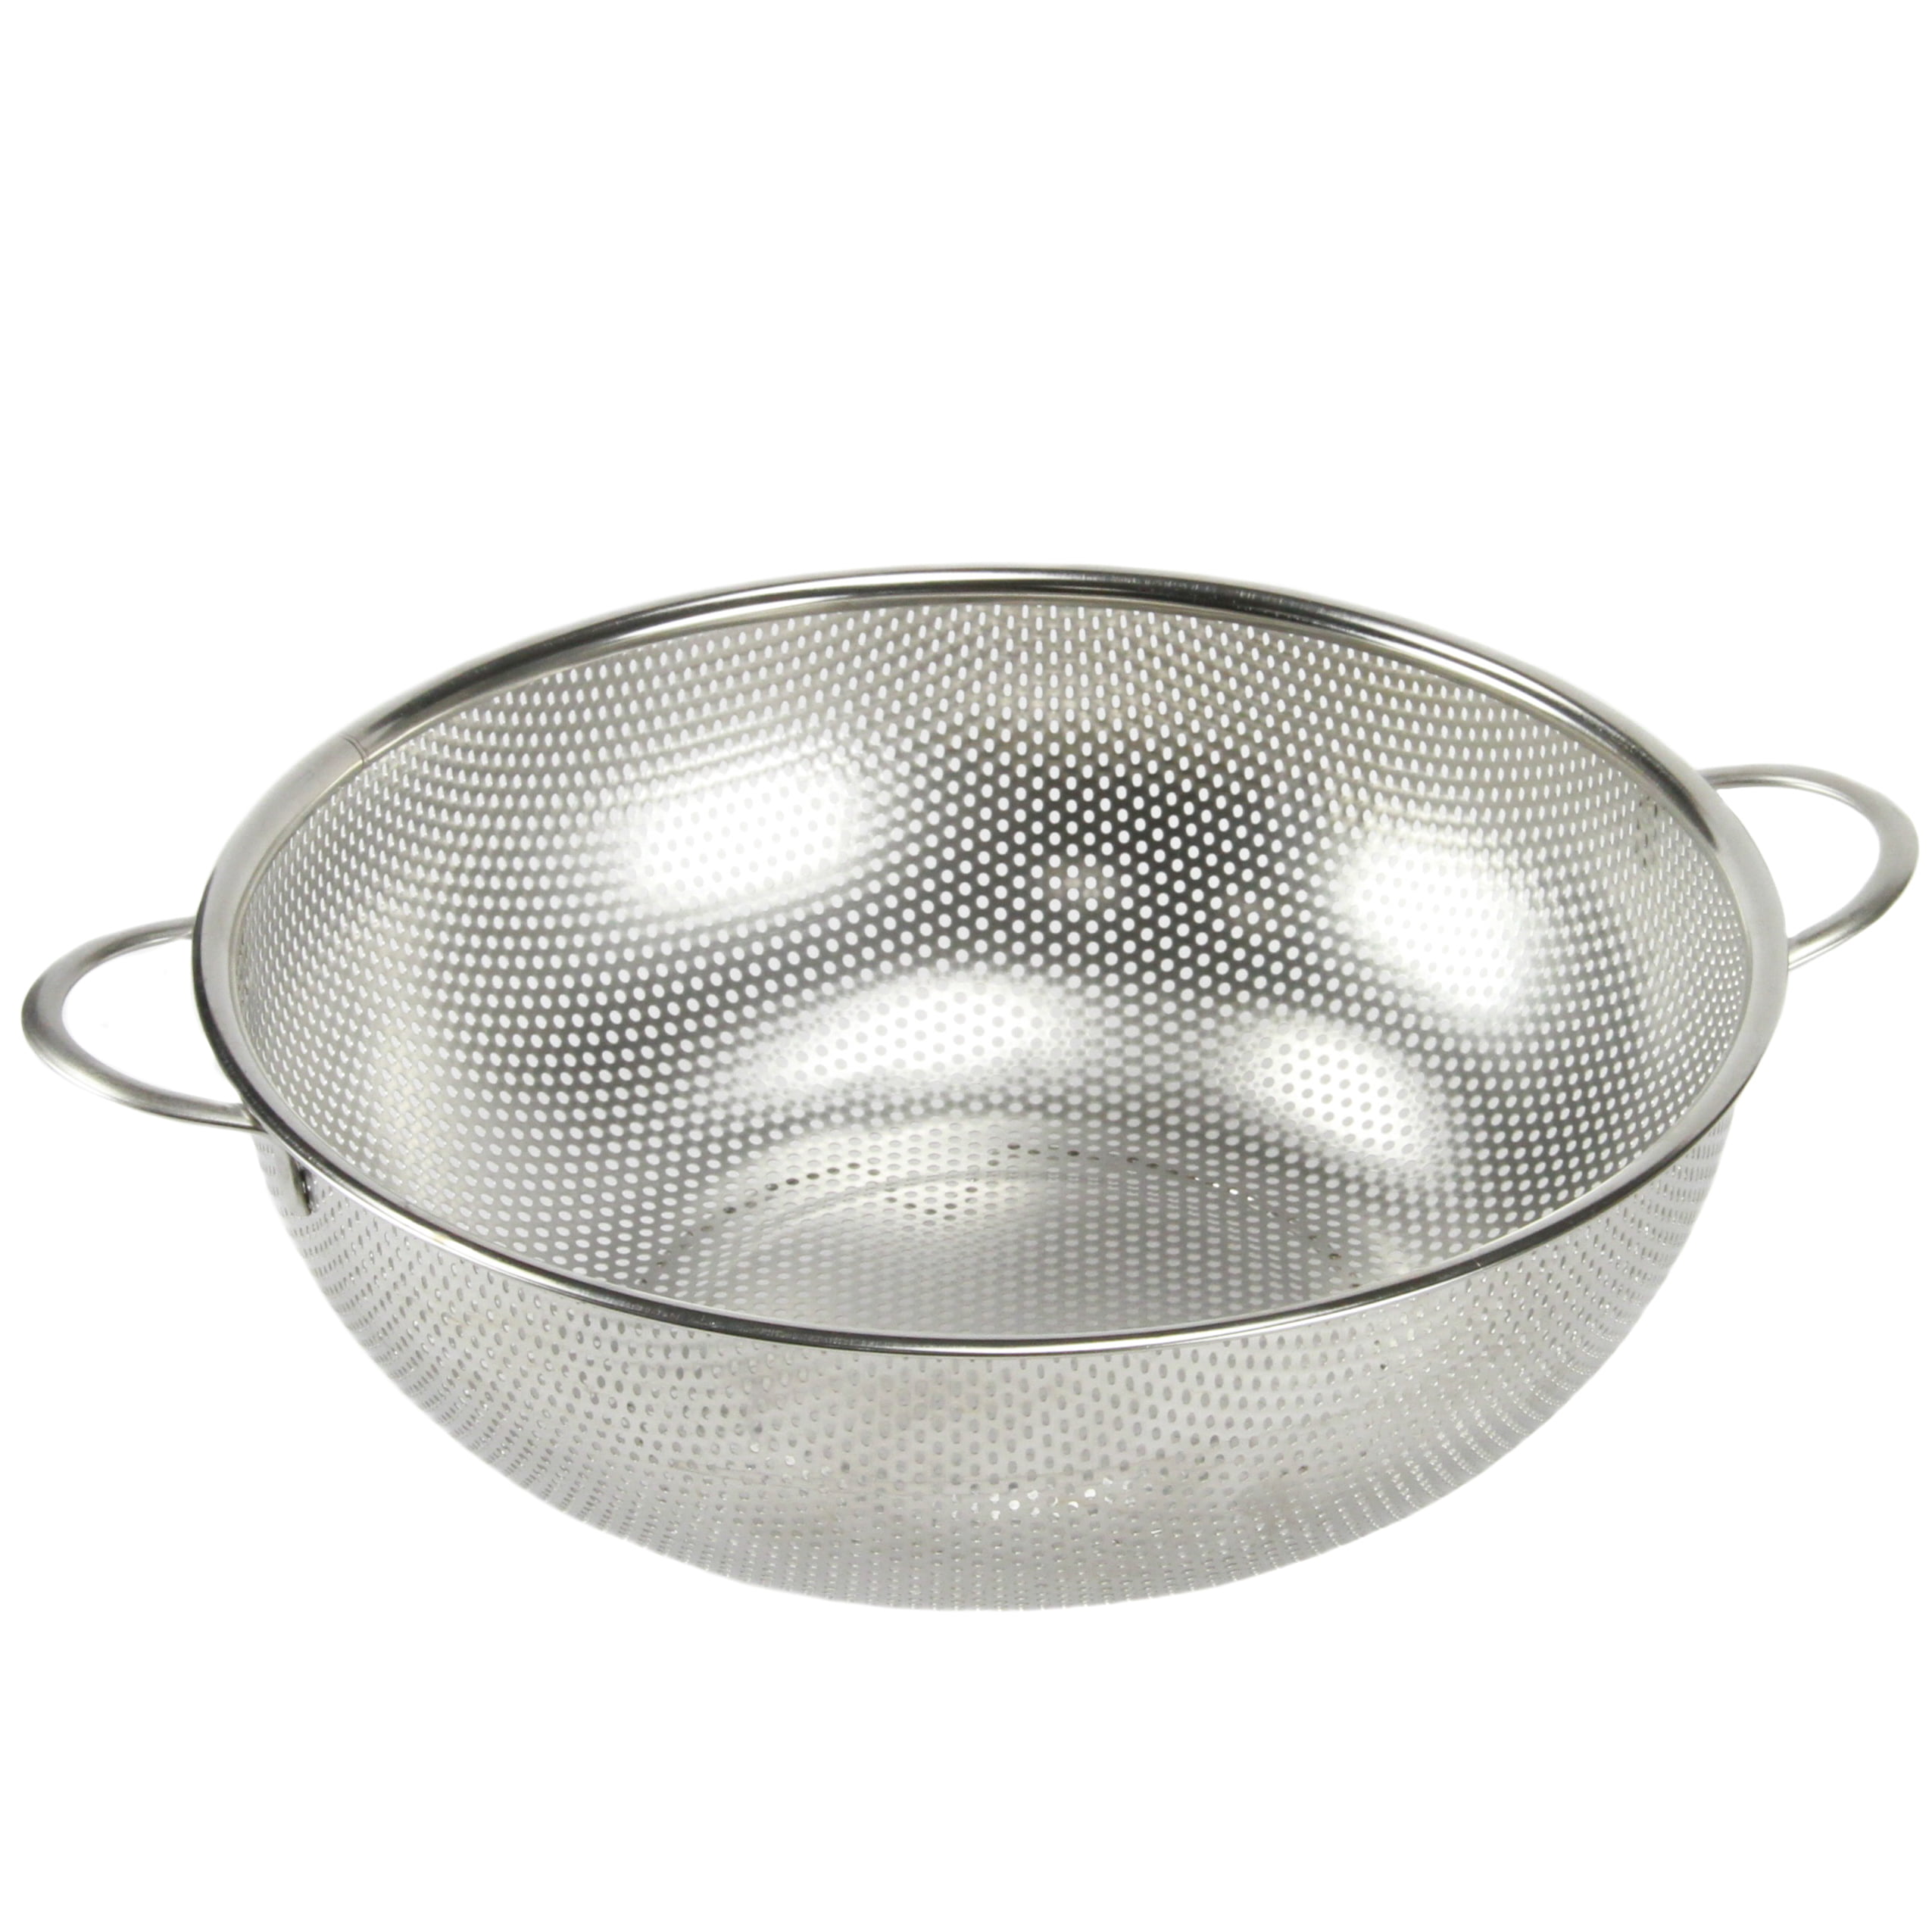 Picture of DDI 2288118 5 Quart Stainless Steel Colander Case of 36